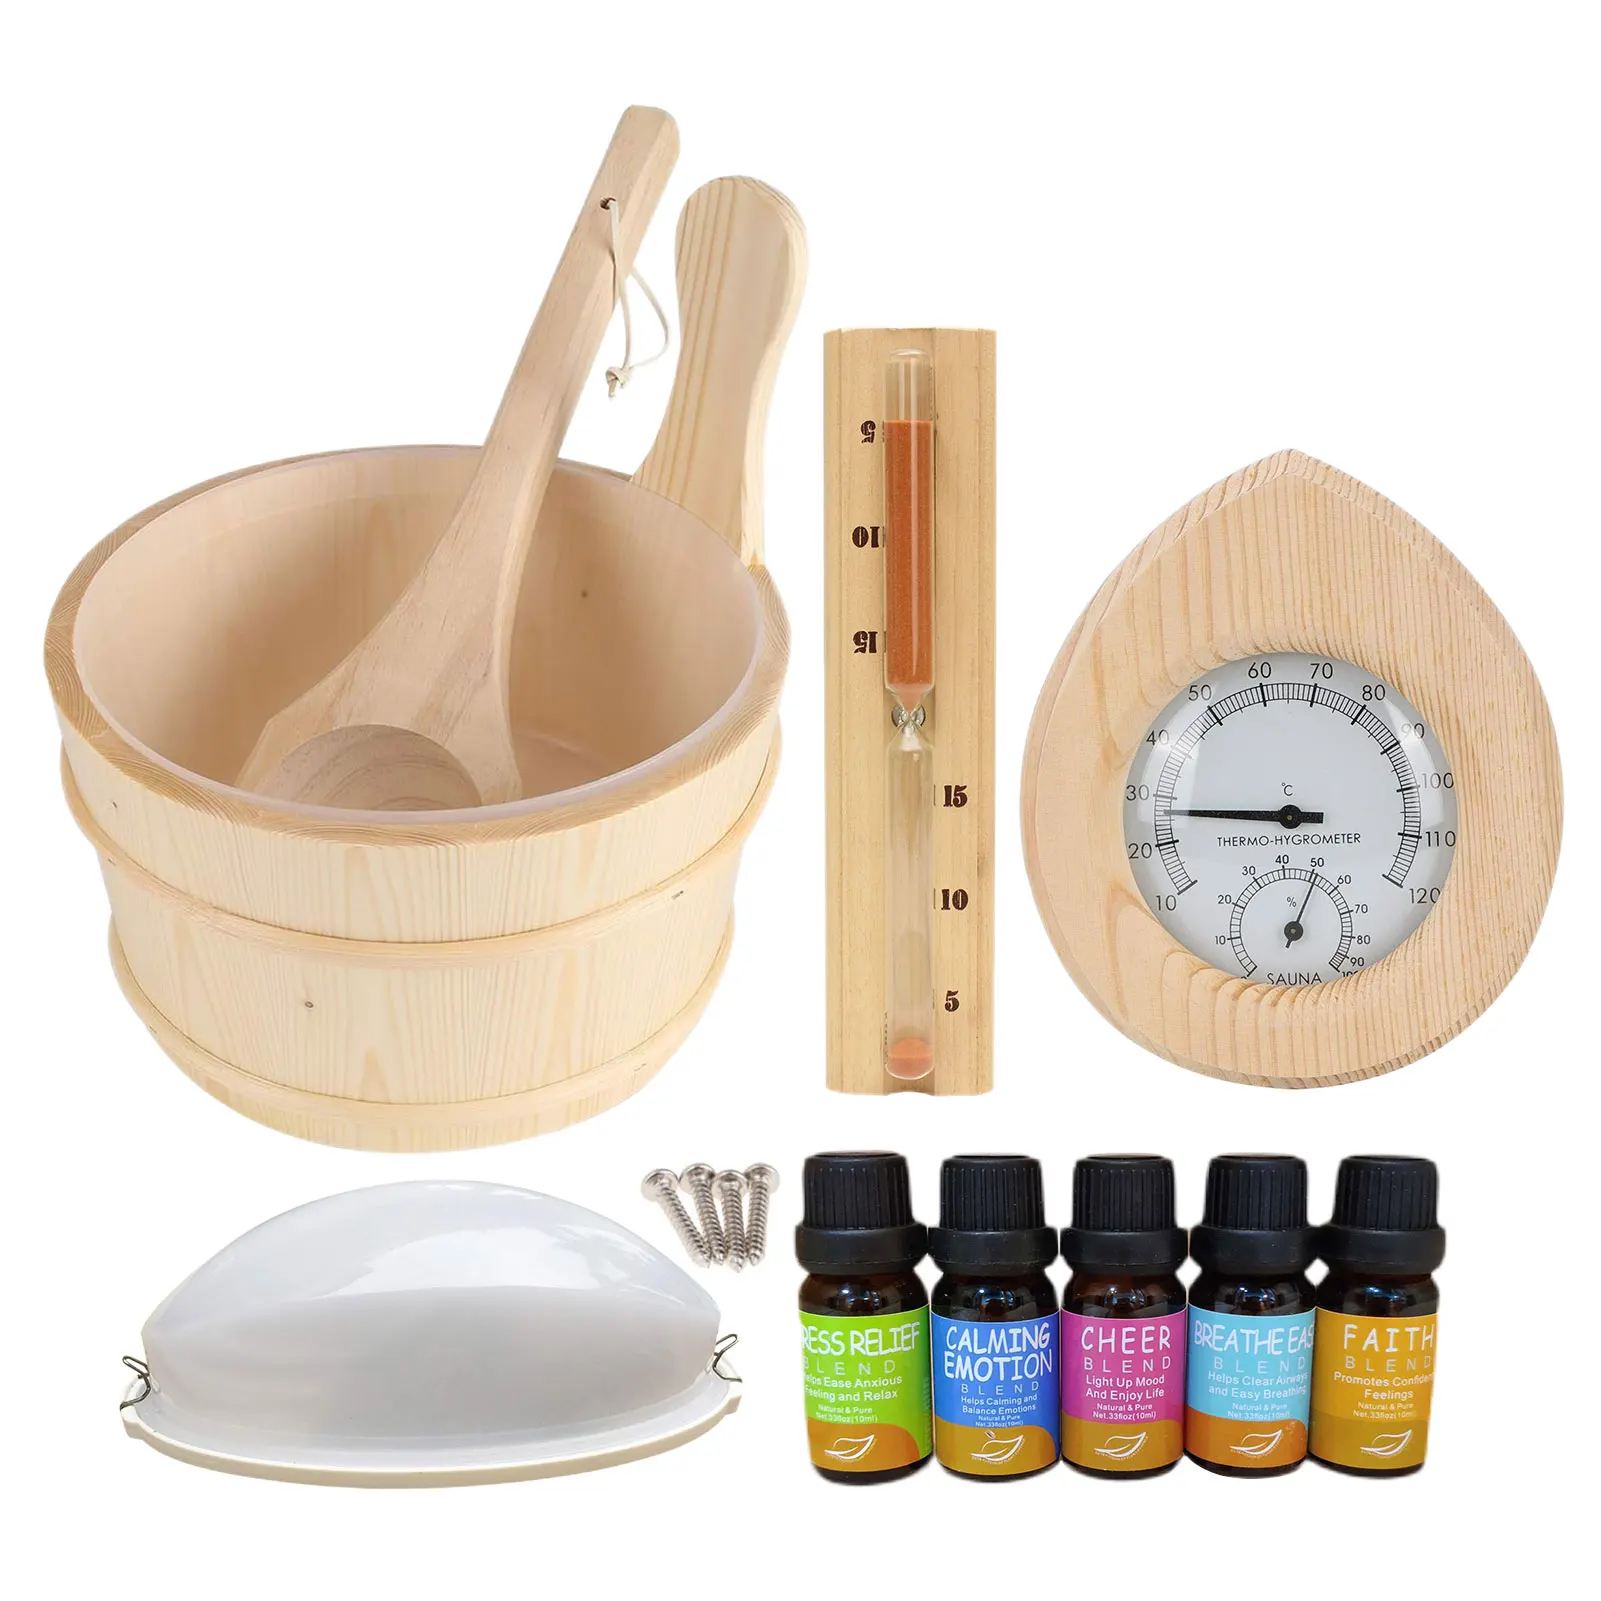 

Wooden Sauna Bucket With 4L Bucket,Spoon,Hourglass,Thermometer And Hygrometer, Lampshade,Essential Spa Accessory For Steam Room